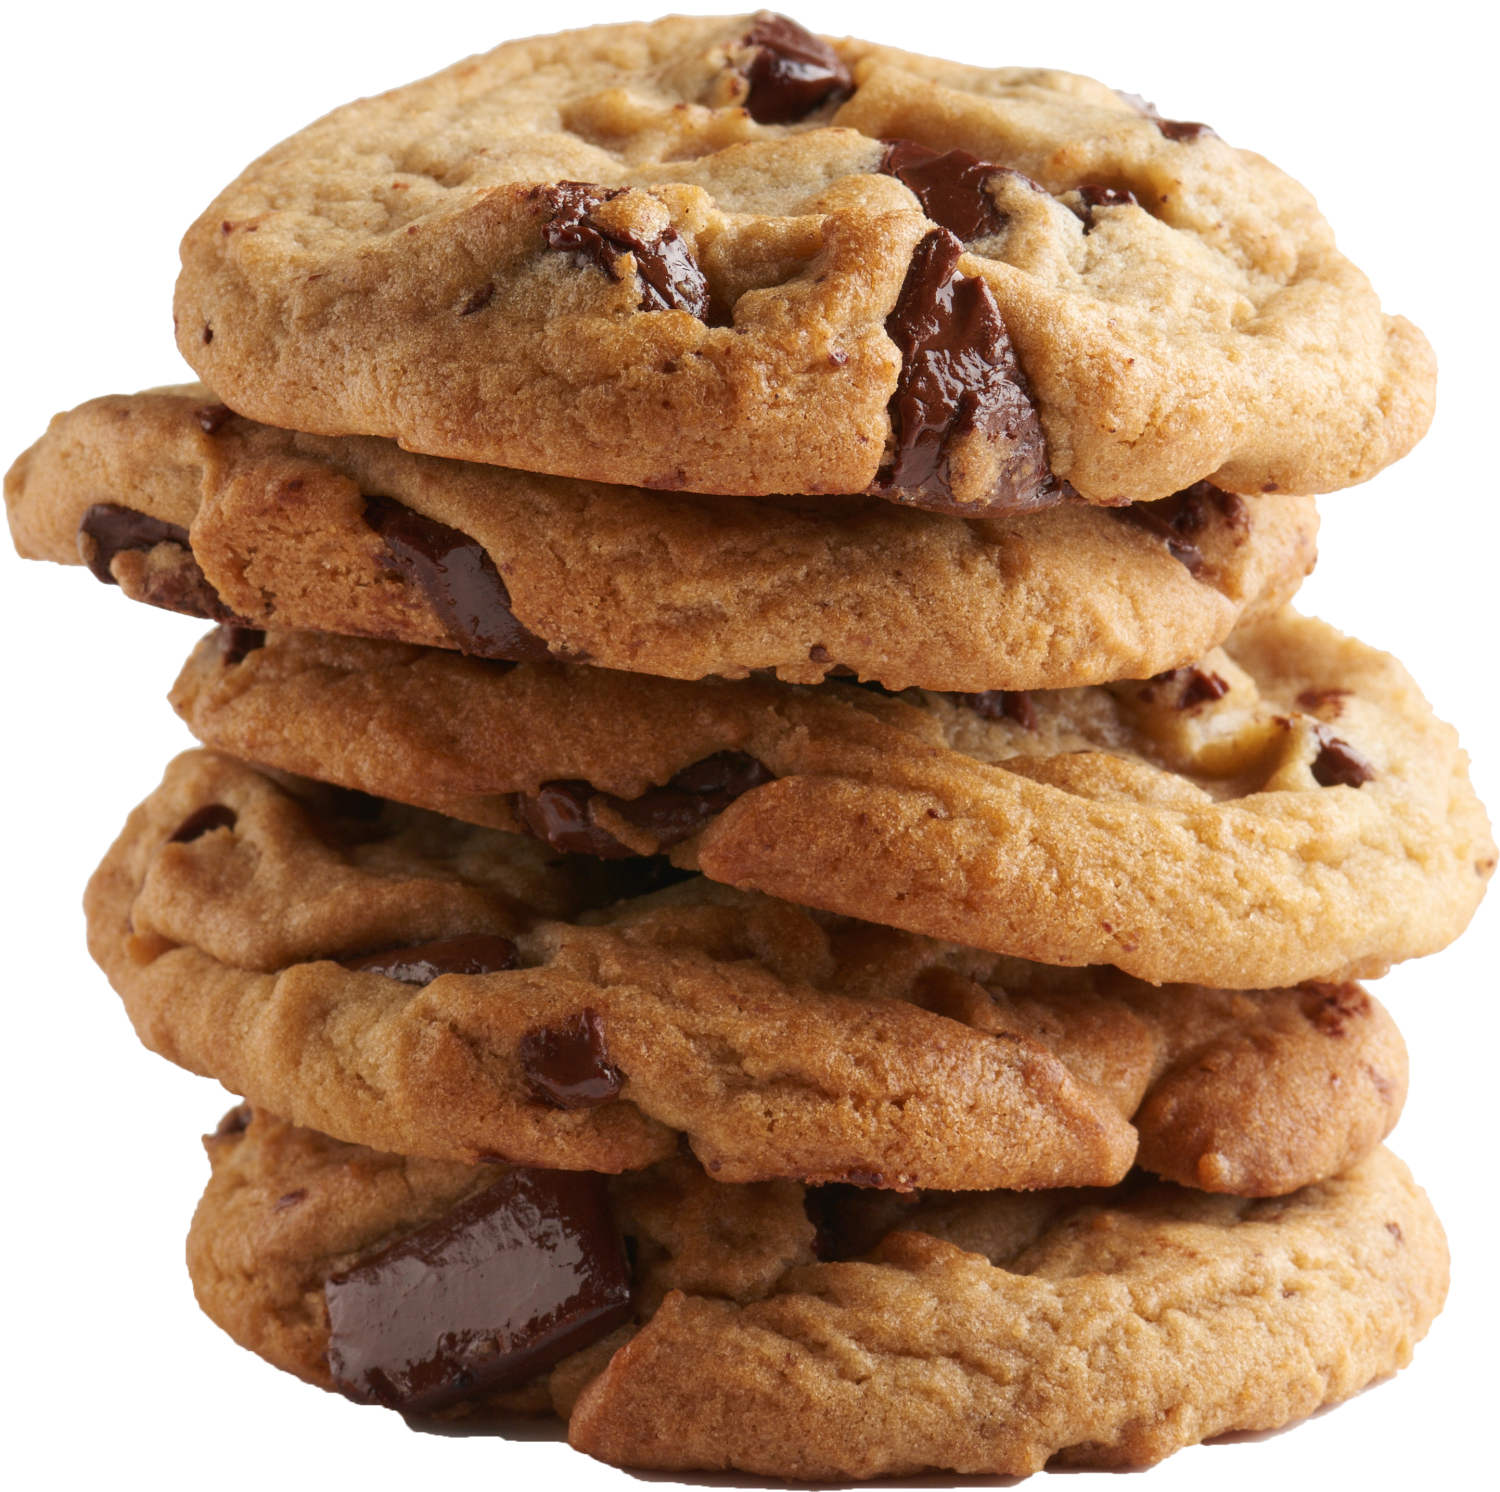 Teachers Get Free 6Pack at Insomnia Cookies in October Mile High on